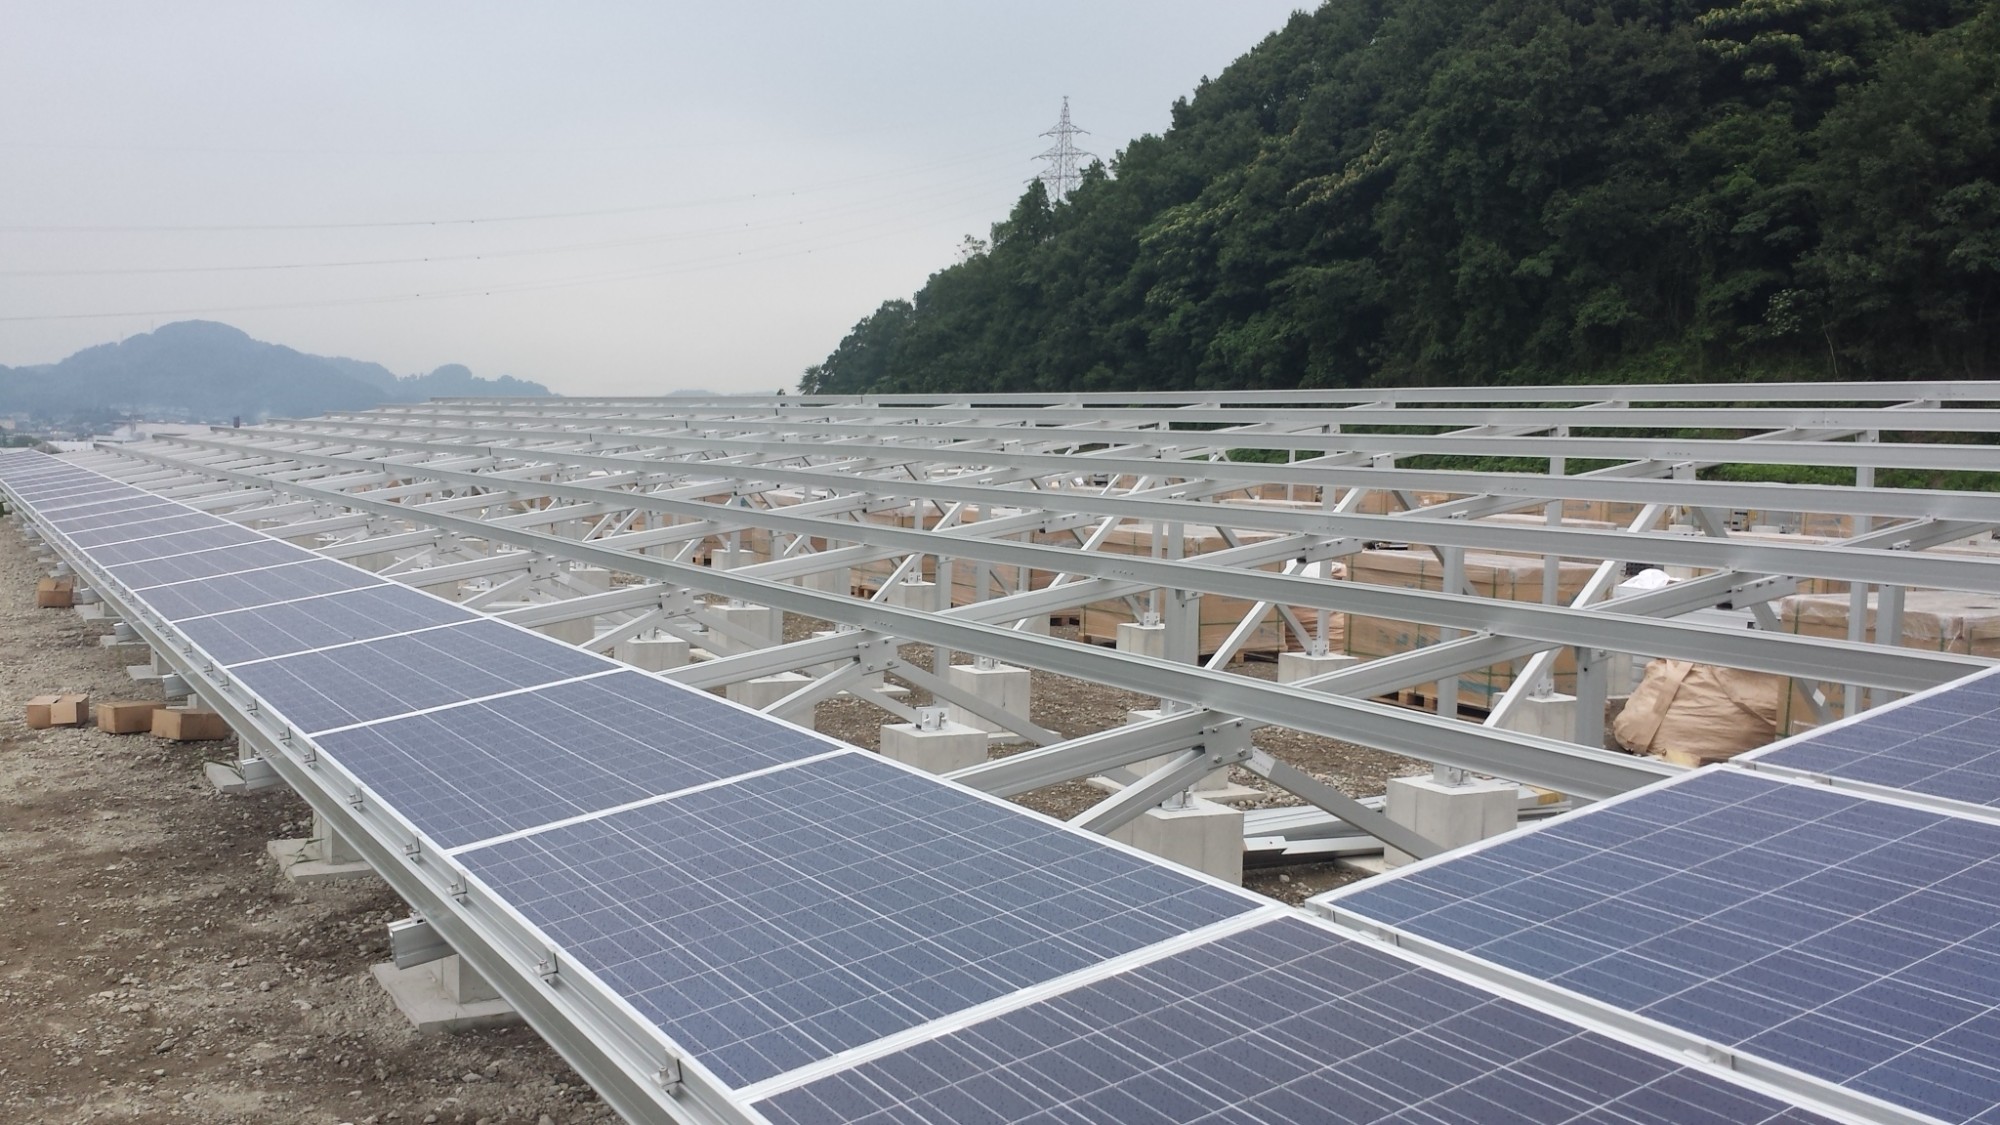 Concret ballast solar energy Mounting Systems Manufacturers, Concret ballast solar energy Mounting Systems Factory, Supply Concret ballast solar energy Mounting Systems